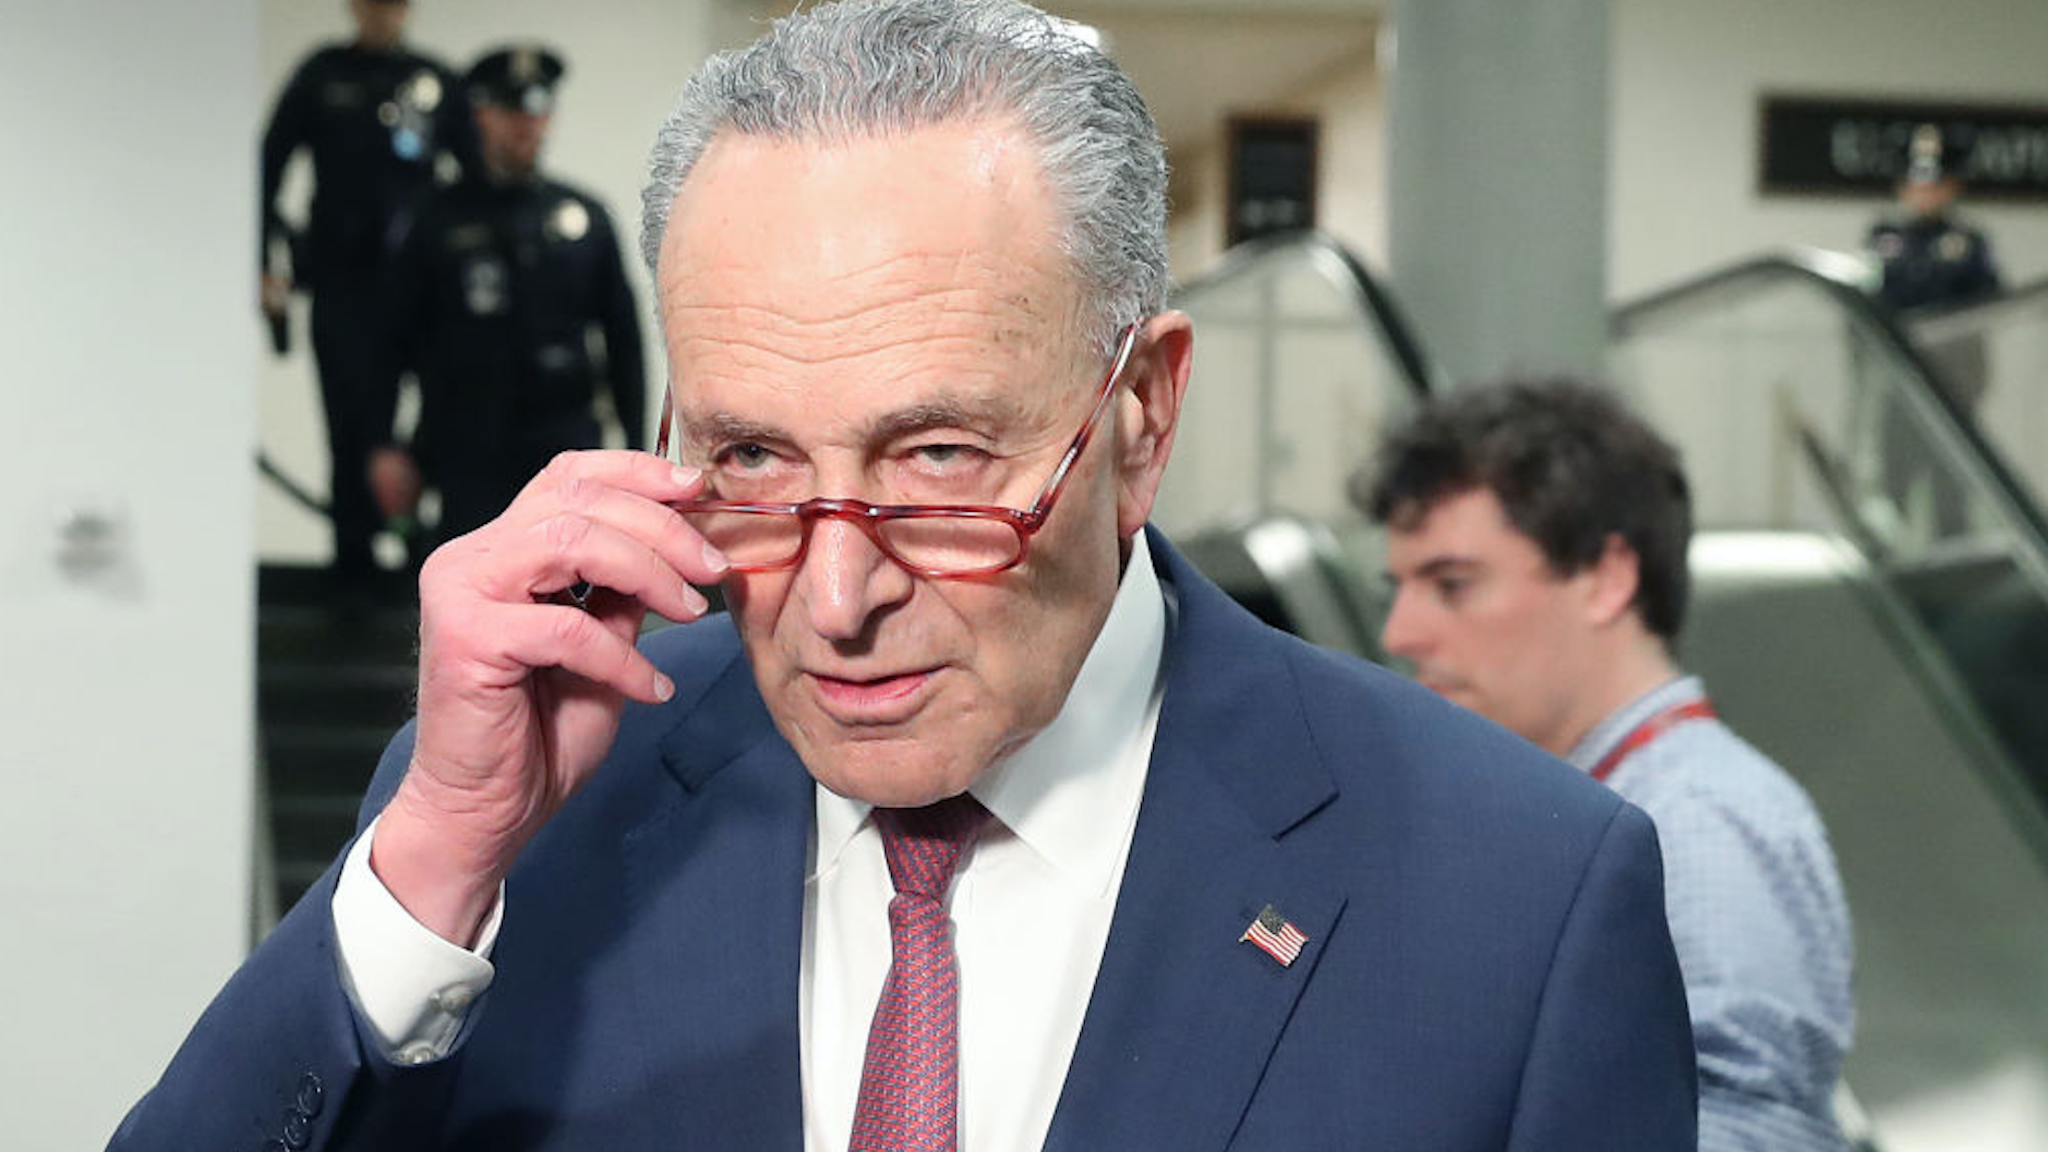 Senate Minority Leader Charles Schumer (D-NY) speaks to the media after a vote to call witnesses fails during the Senate impeachment trial of U.S. President Donald Trump, on January 31, 2020 in Washington, DC.